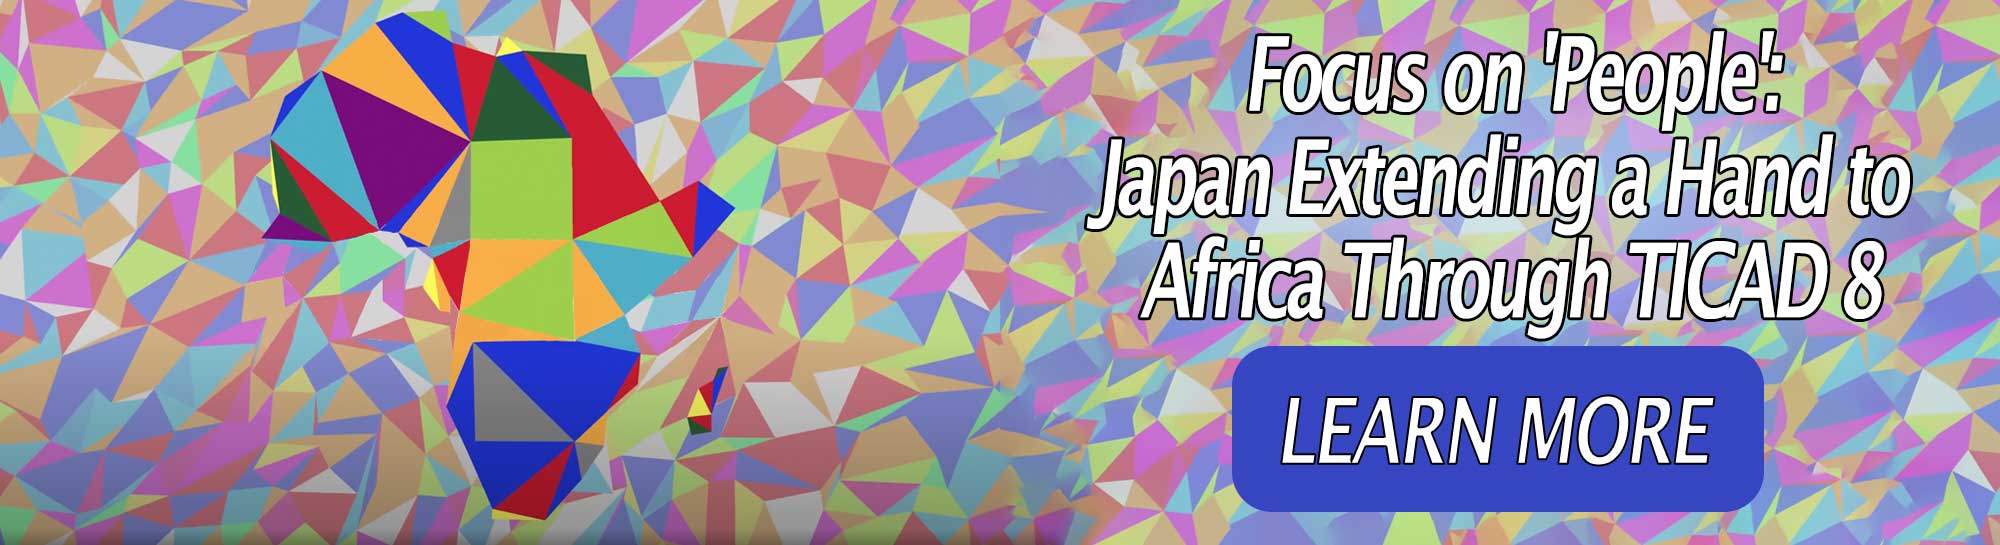 Focus on 'People': Japan Raises a Hand in Africa Through TICAD 8